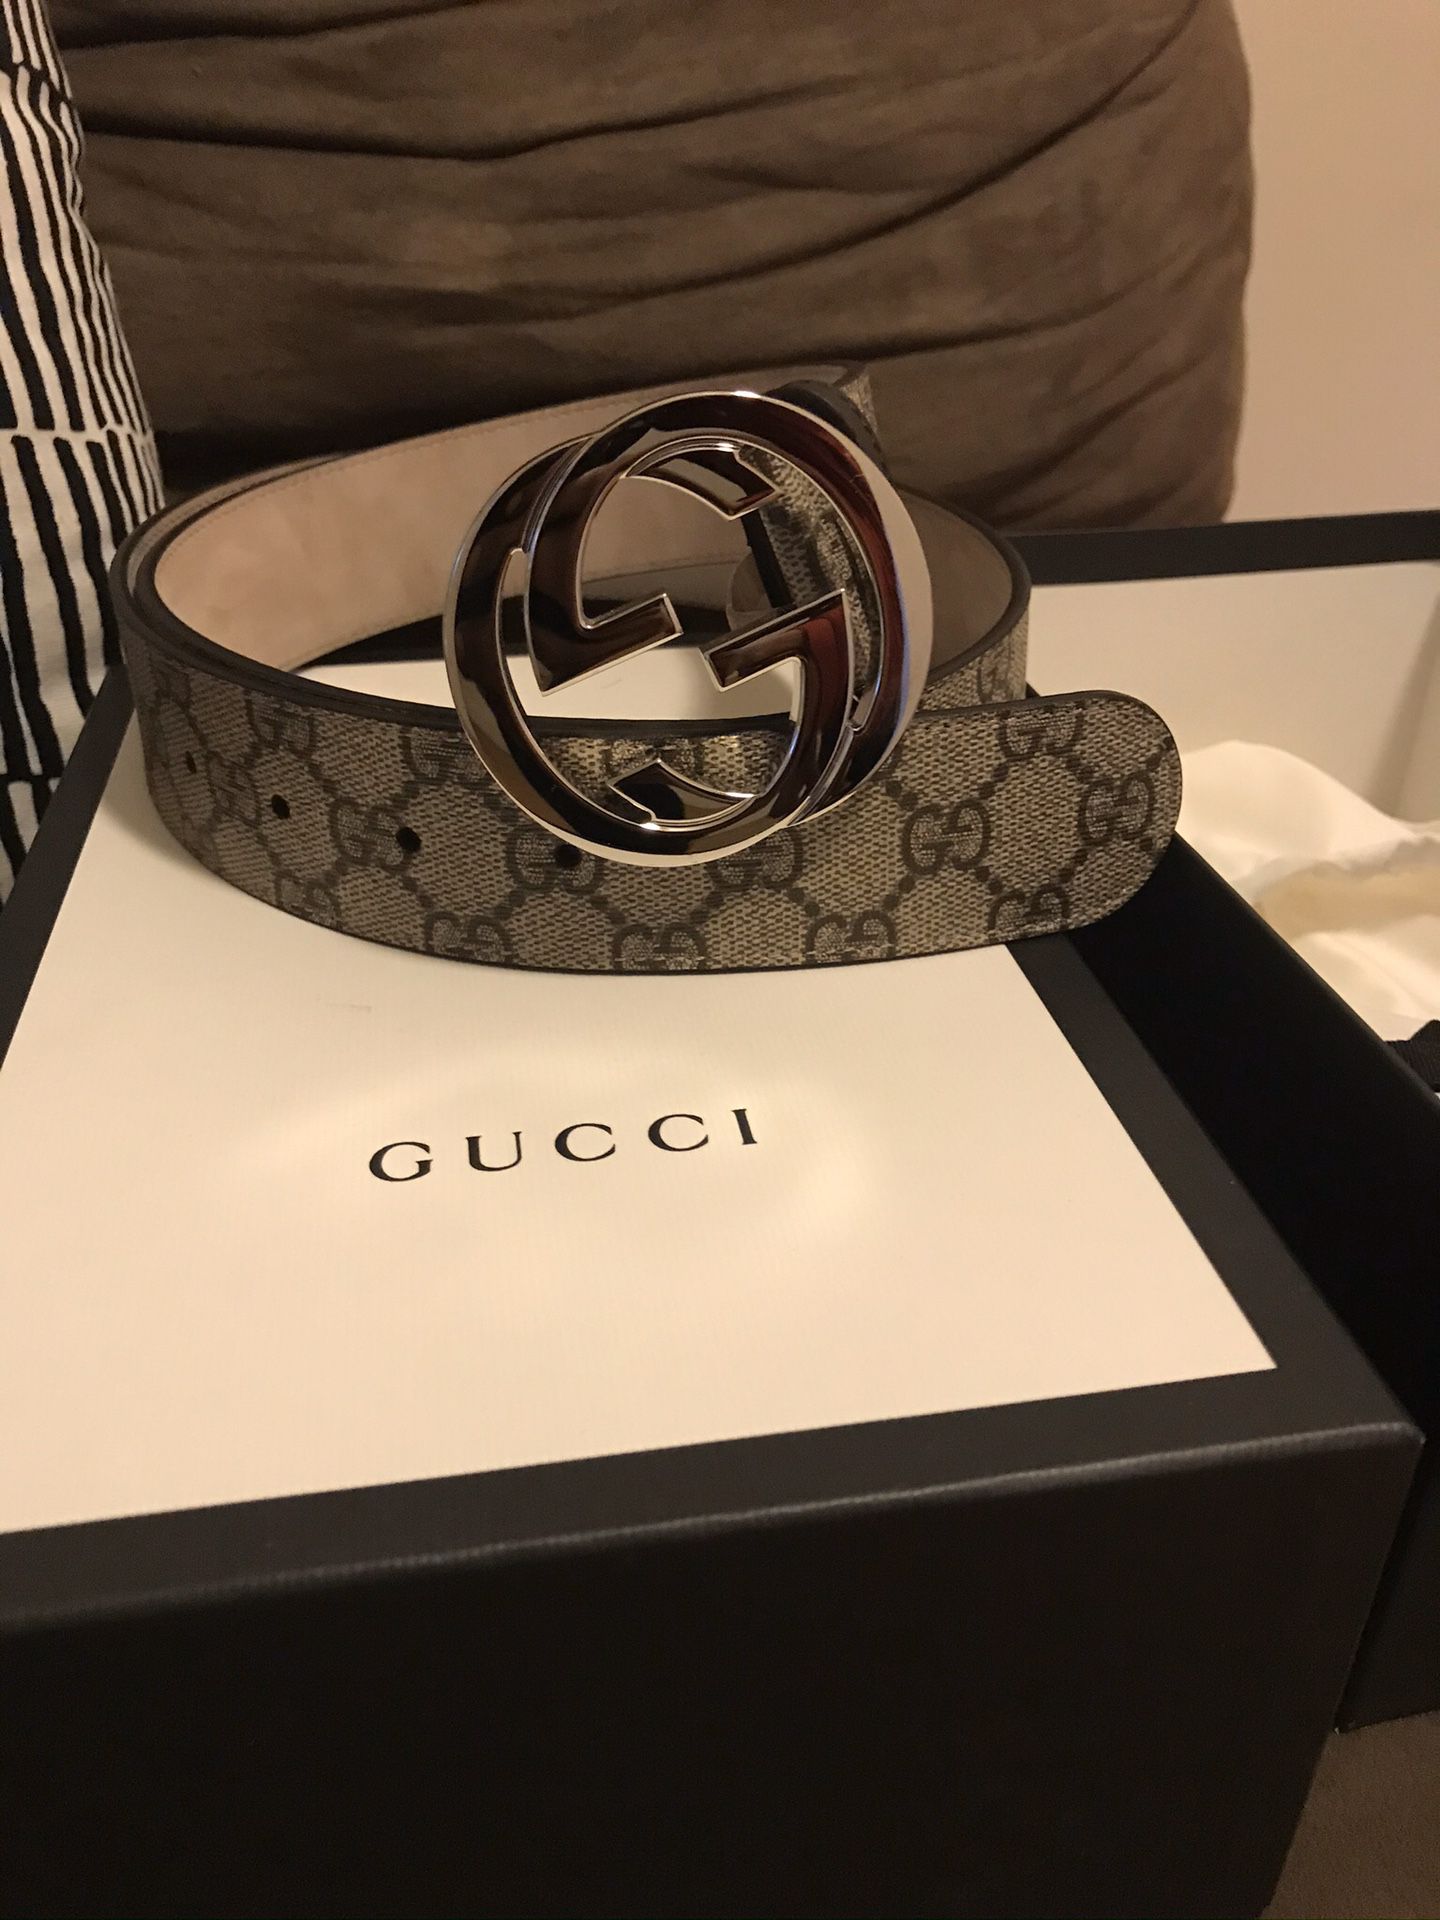 Men’s Authentic Gucci Belt with all original bags and boxes